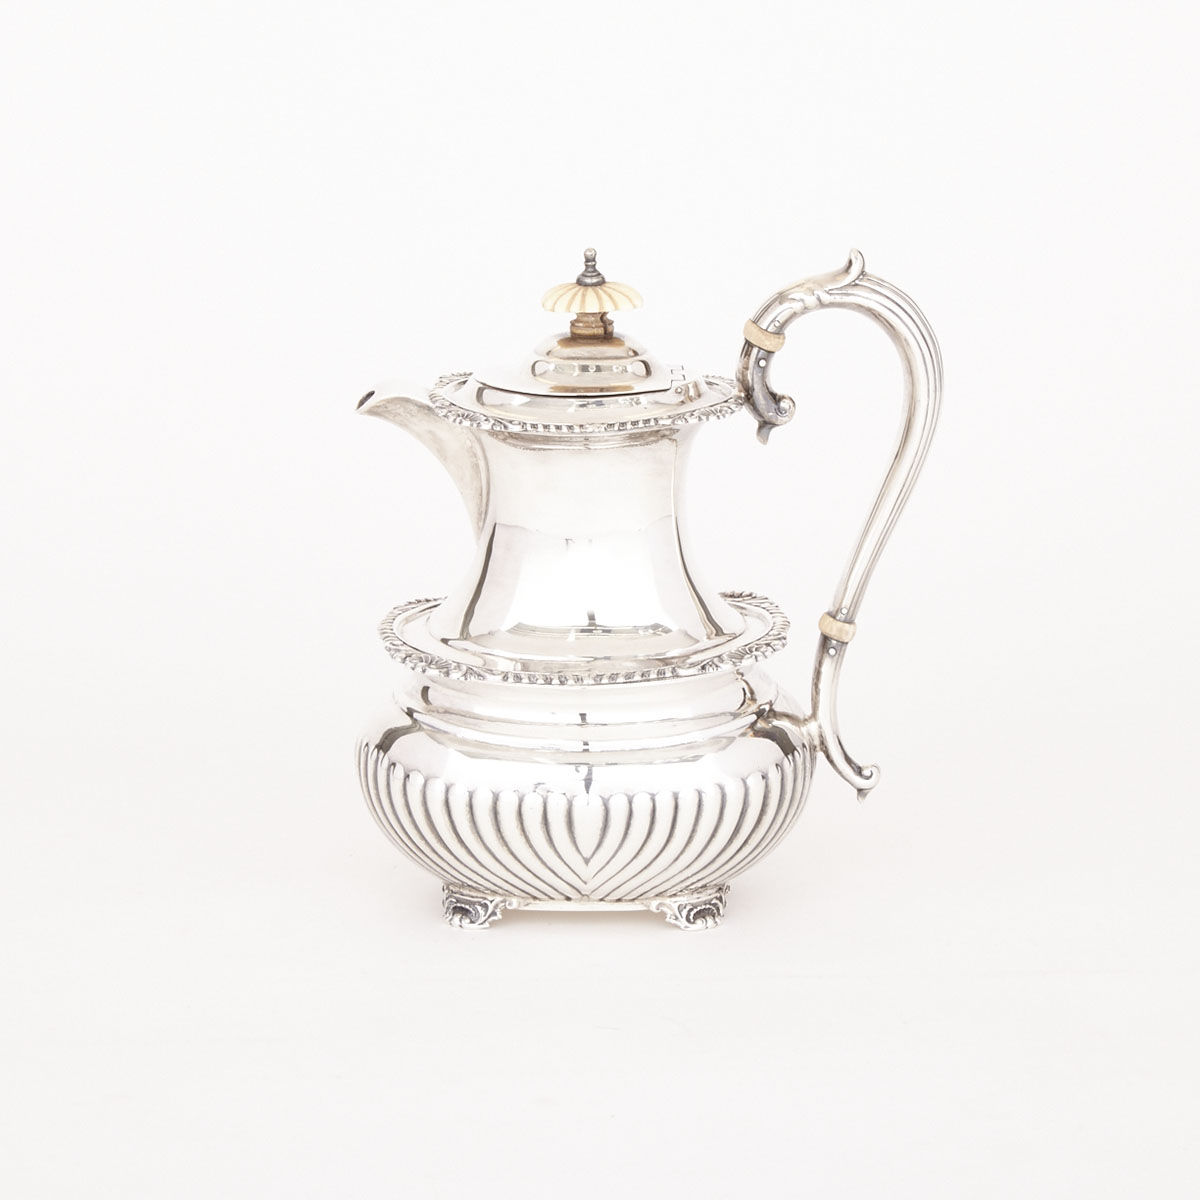 Canadian Silver Hot Water Pot, Henry Birks & Sons, Montreal, Que., 1946